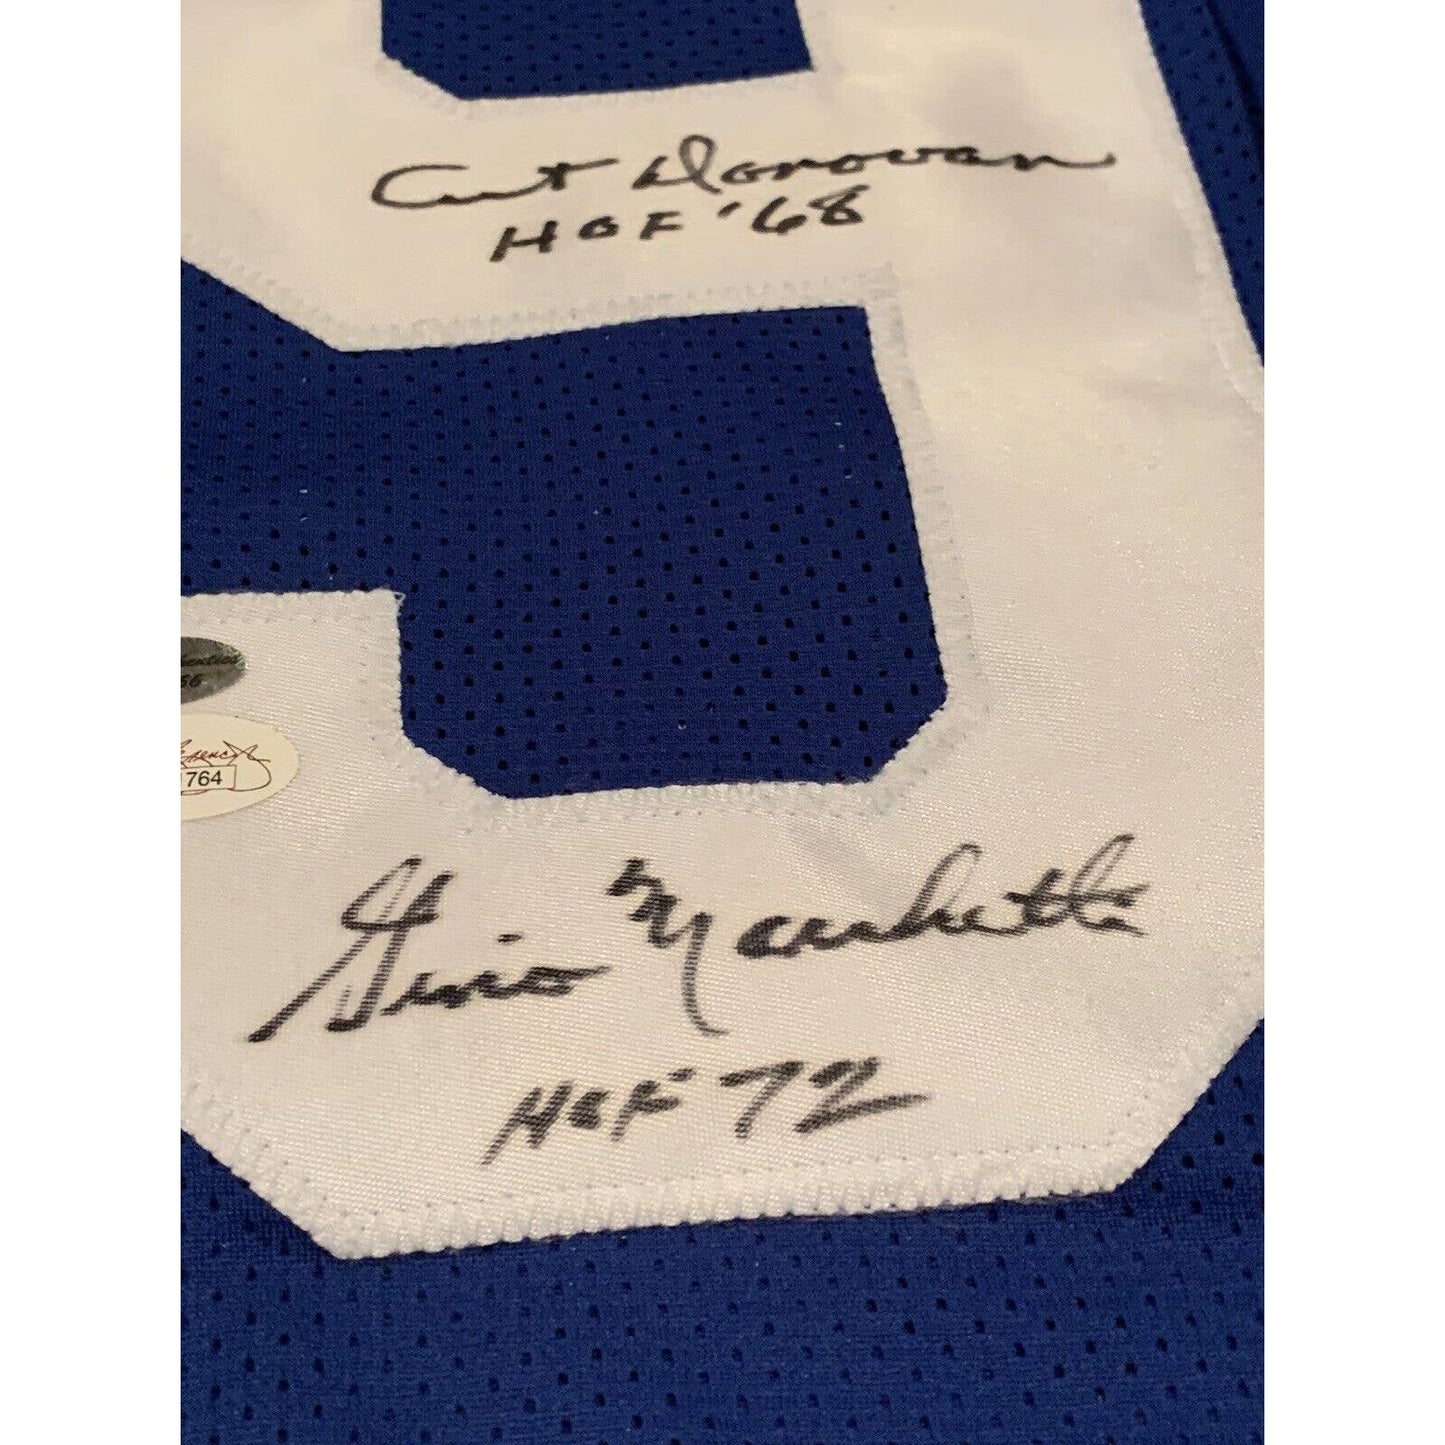 Donovan Moore Marchetti Autographed/Signed Jersey Indianapolis Colts Baltimore - TreasuresEvolved